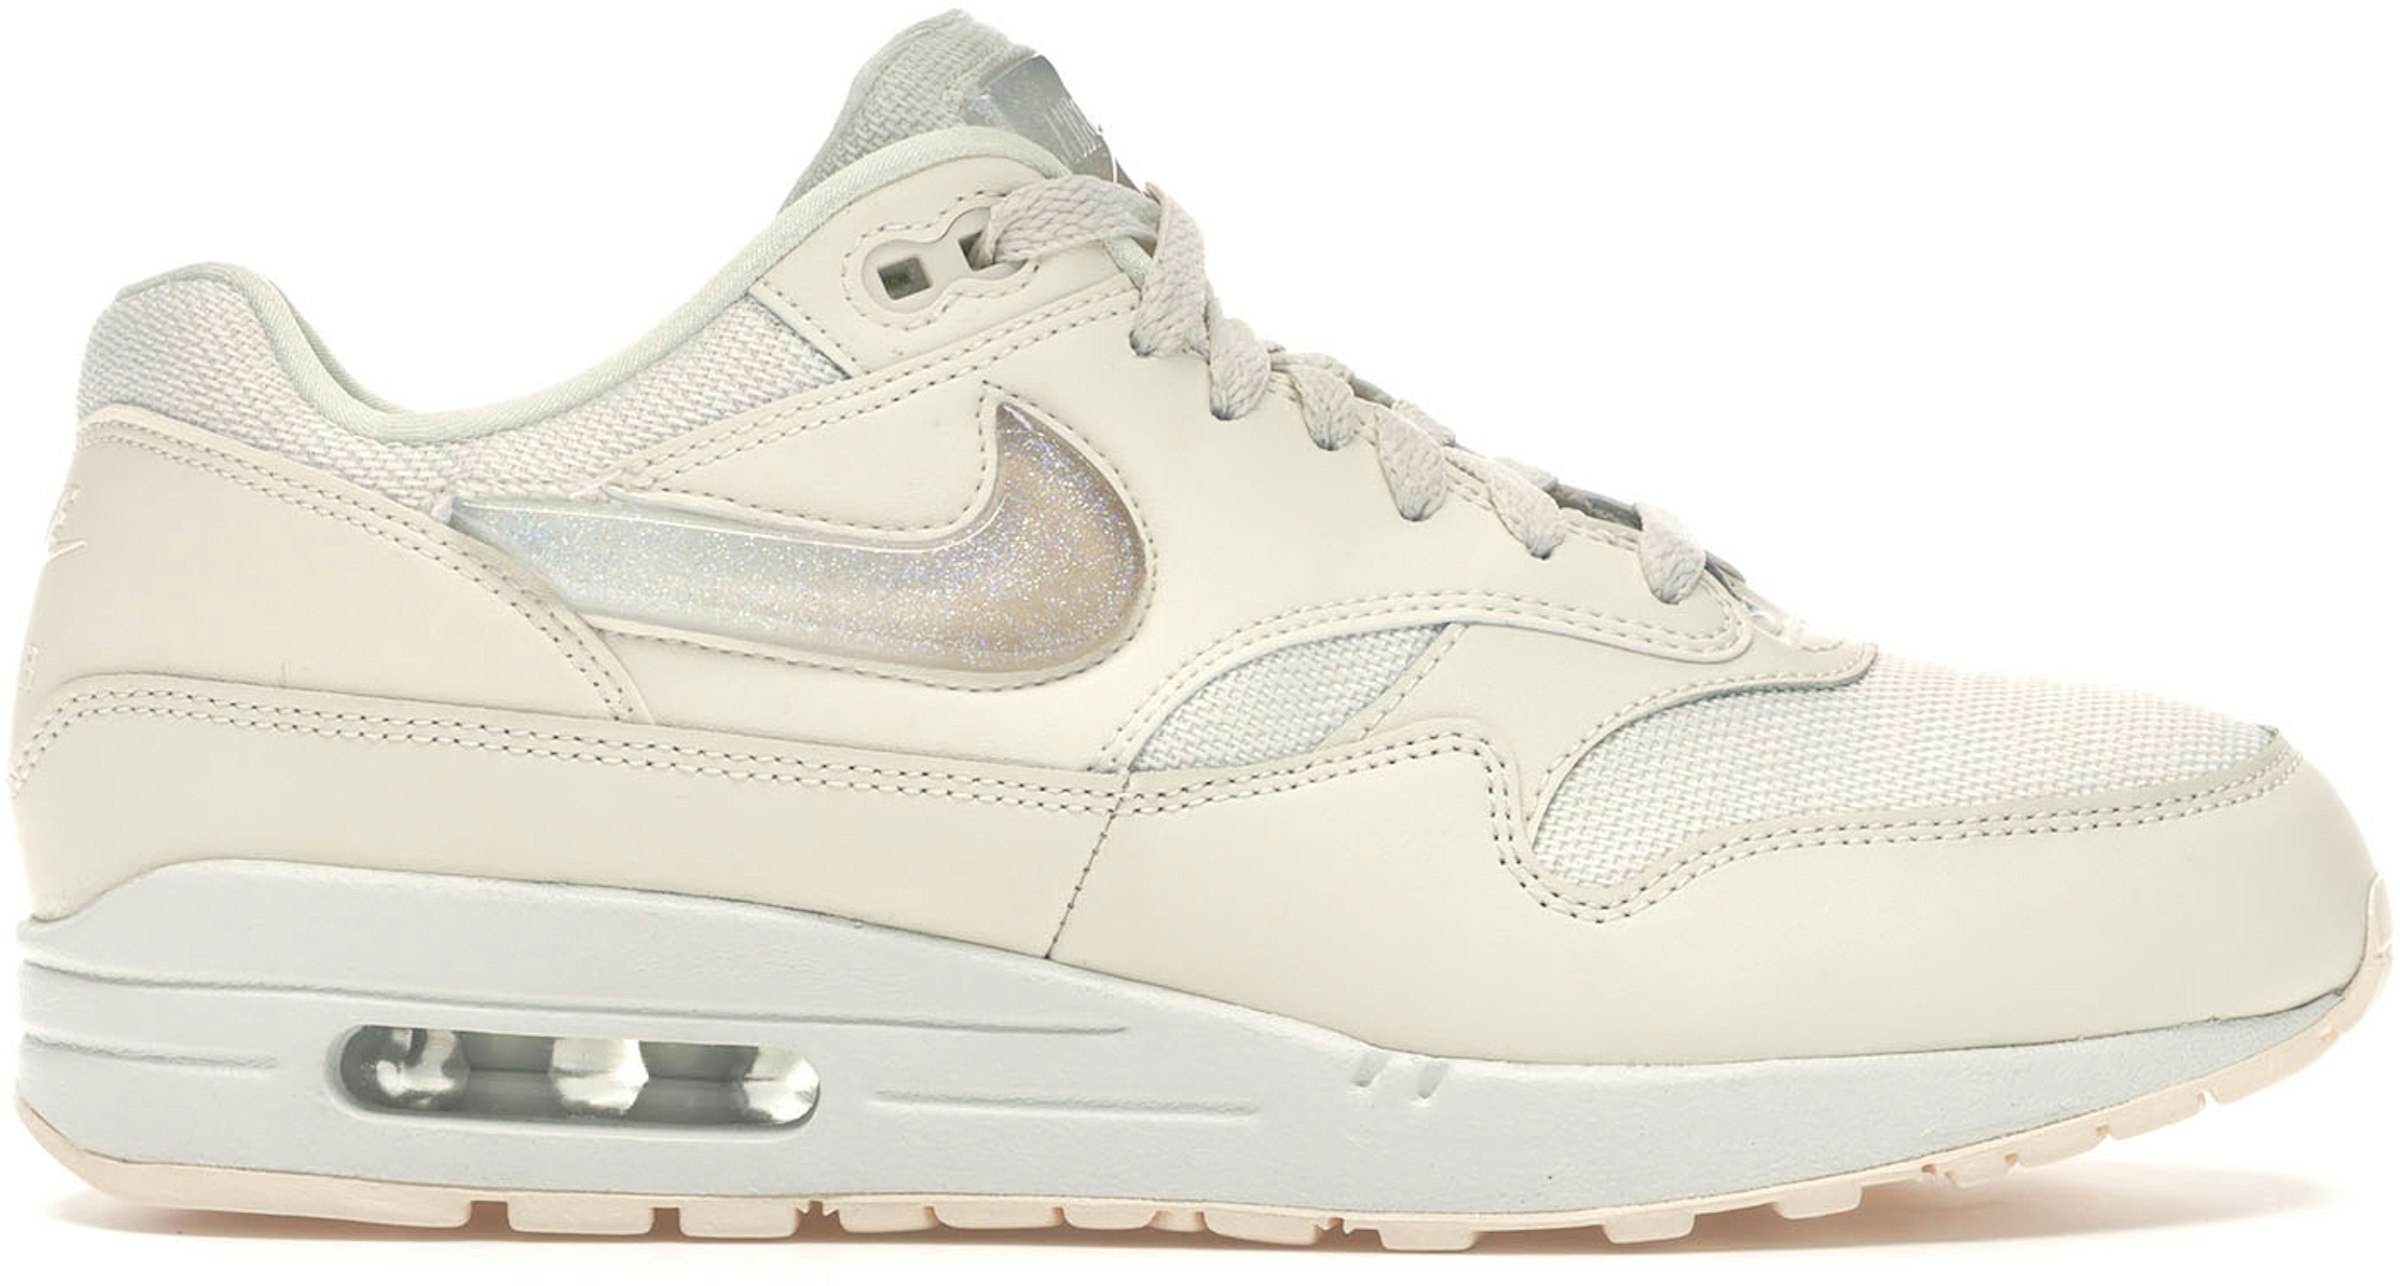 Nike Air Max 1 Jelly Puff Pale Ivory - AT5248-100 - US